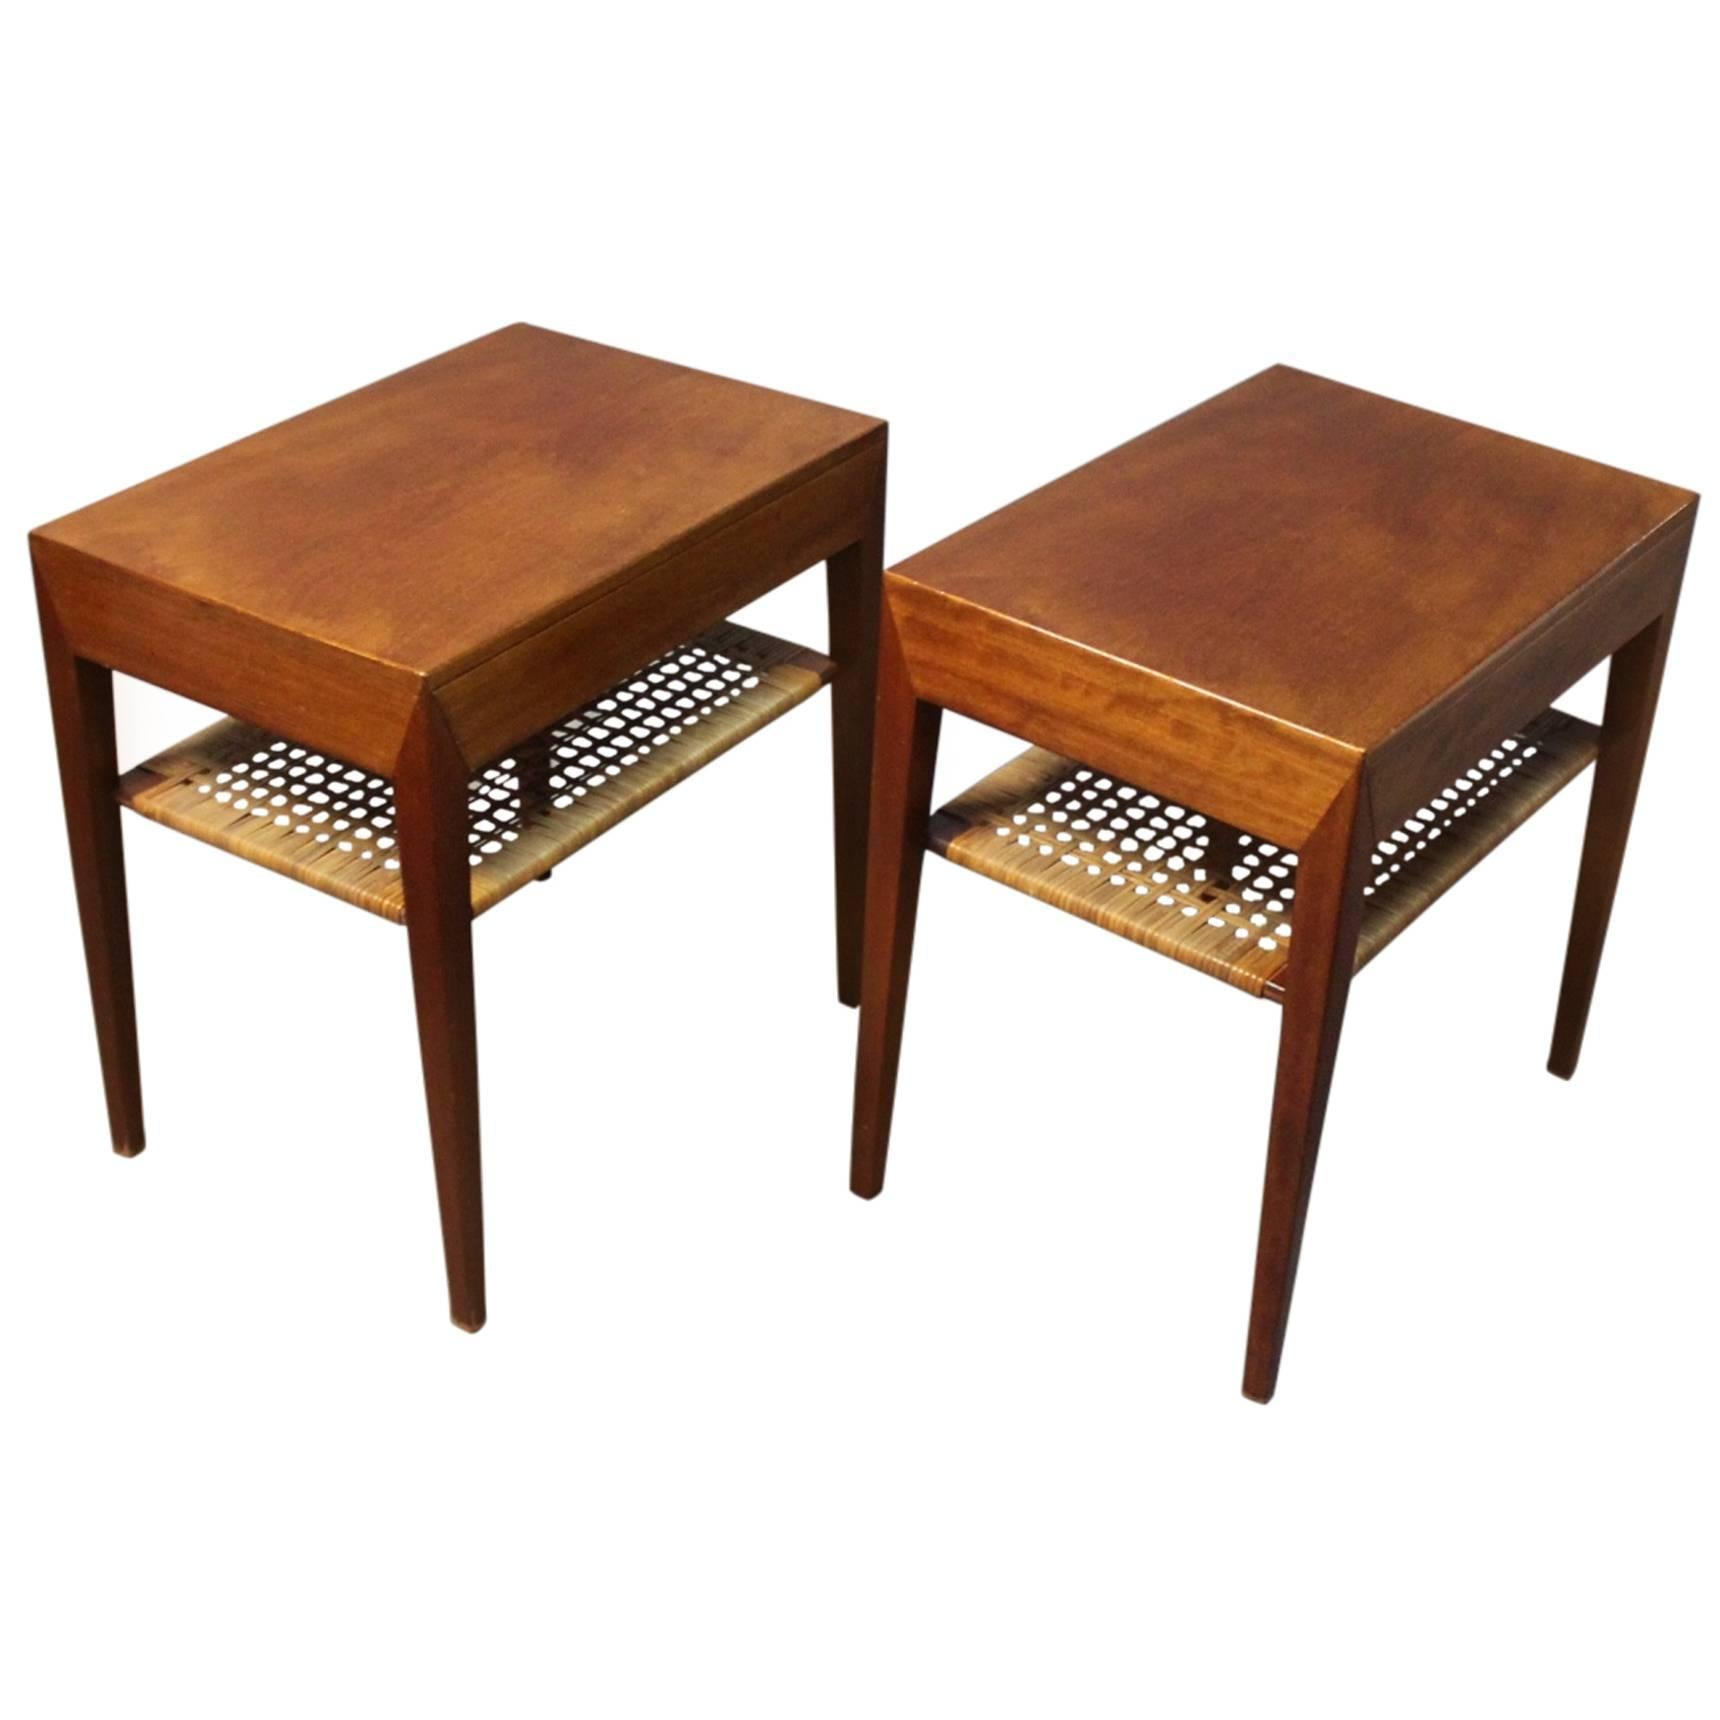 Pair of Side Tables from Haslev Furniture Factory and Designed by Severin Han